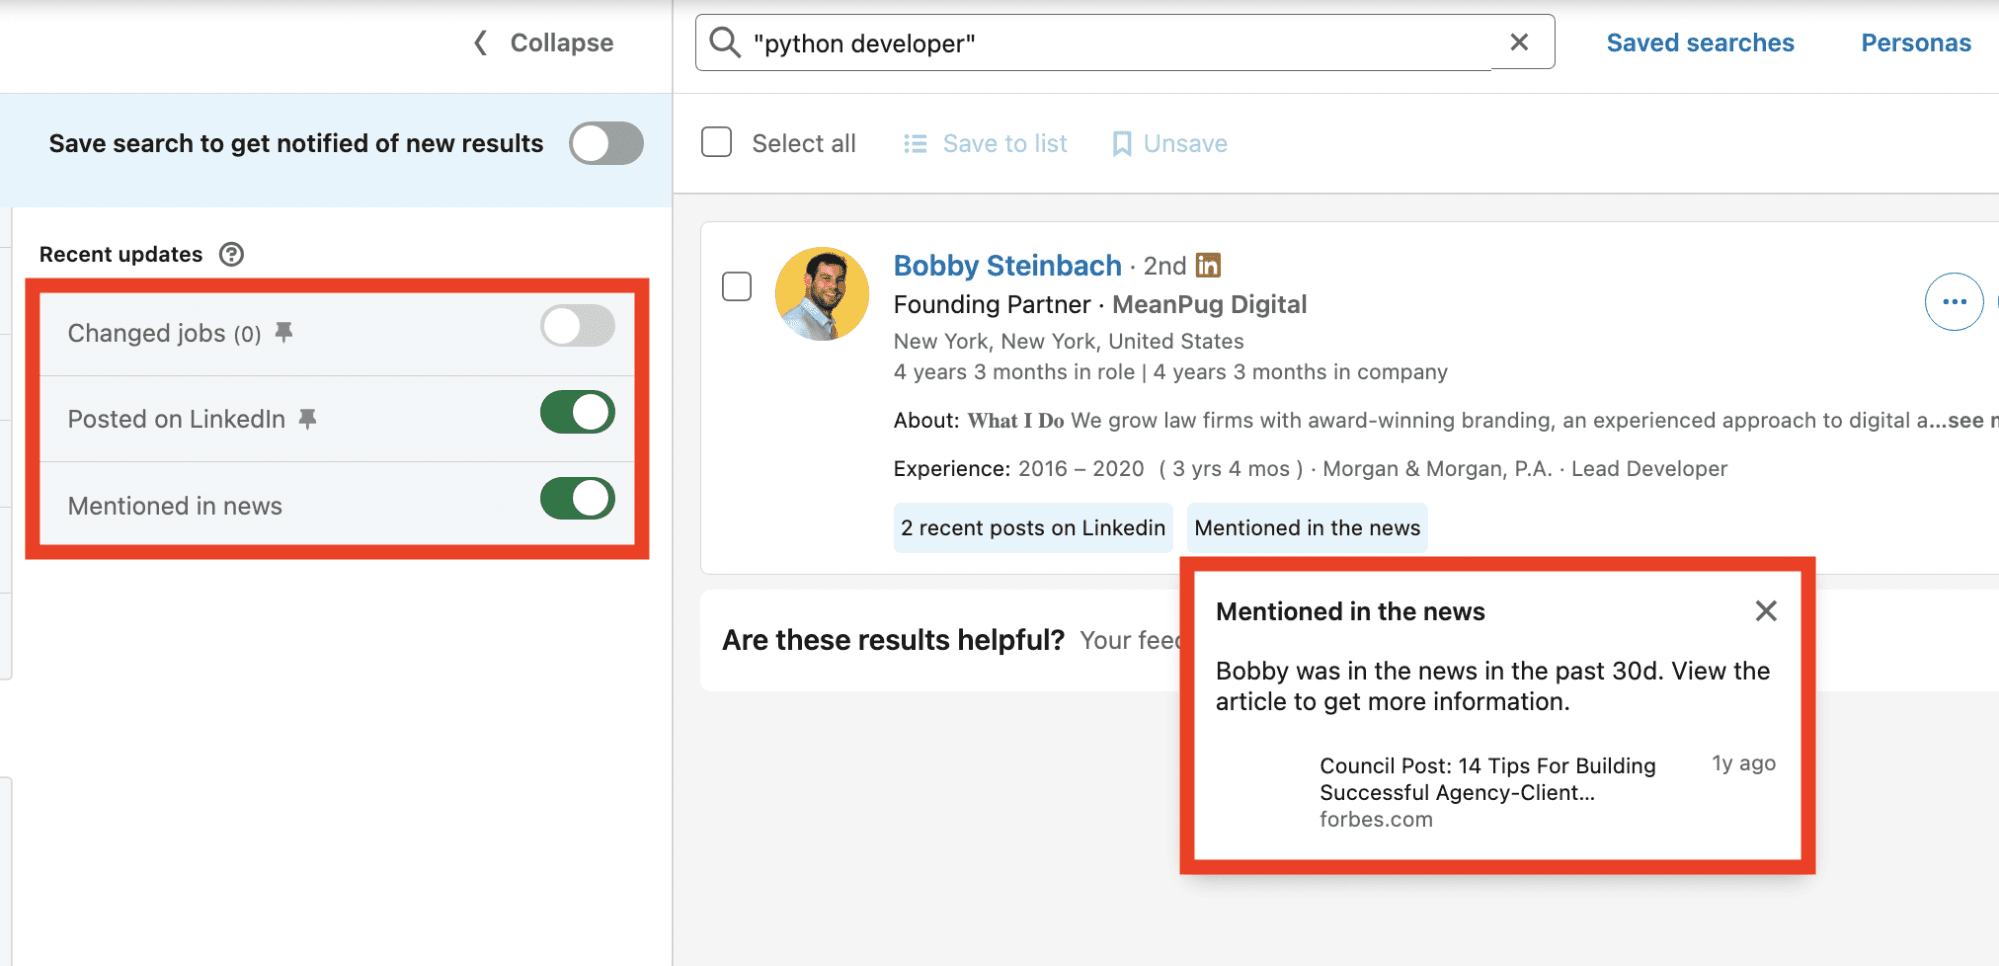 linkedin premium recent updates advanced search filters - image90.png